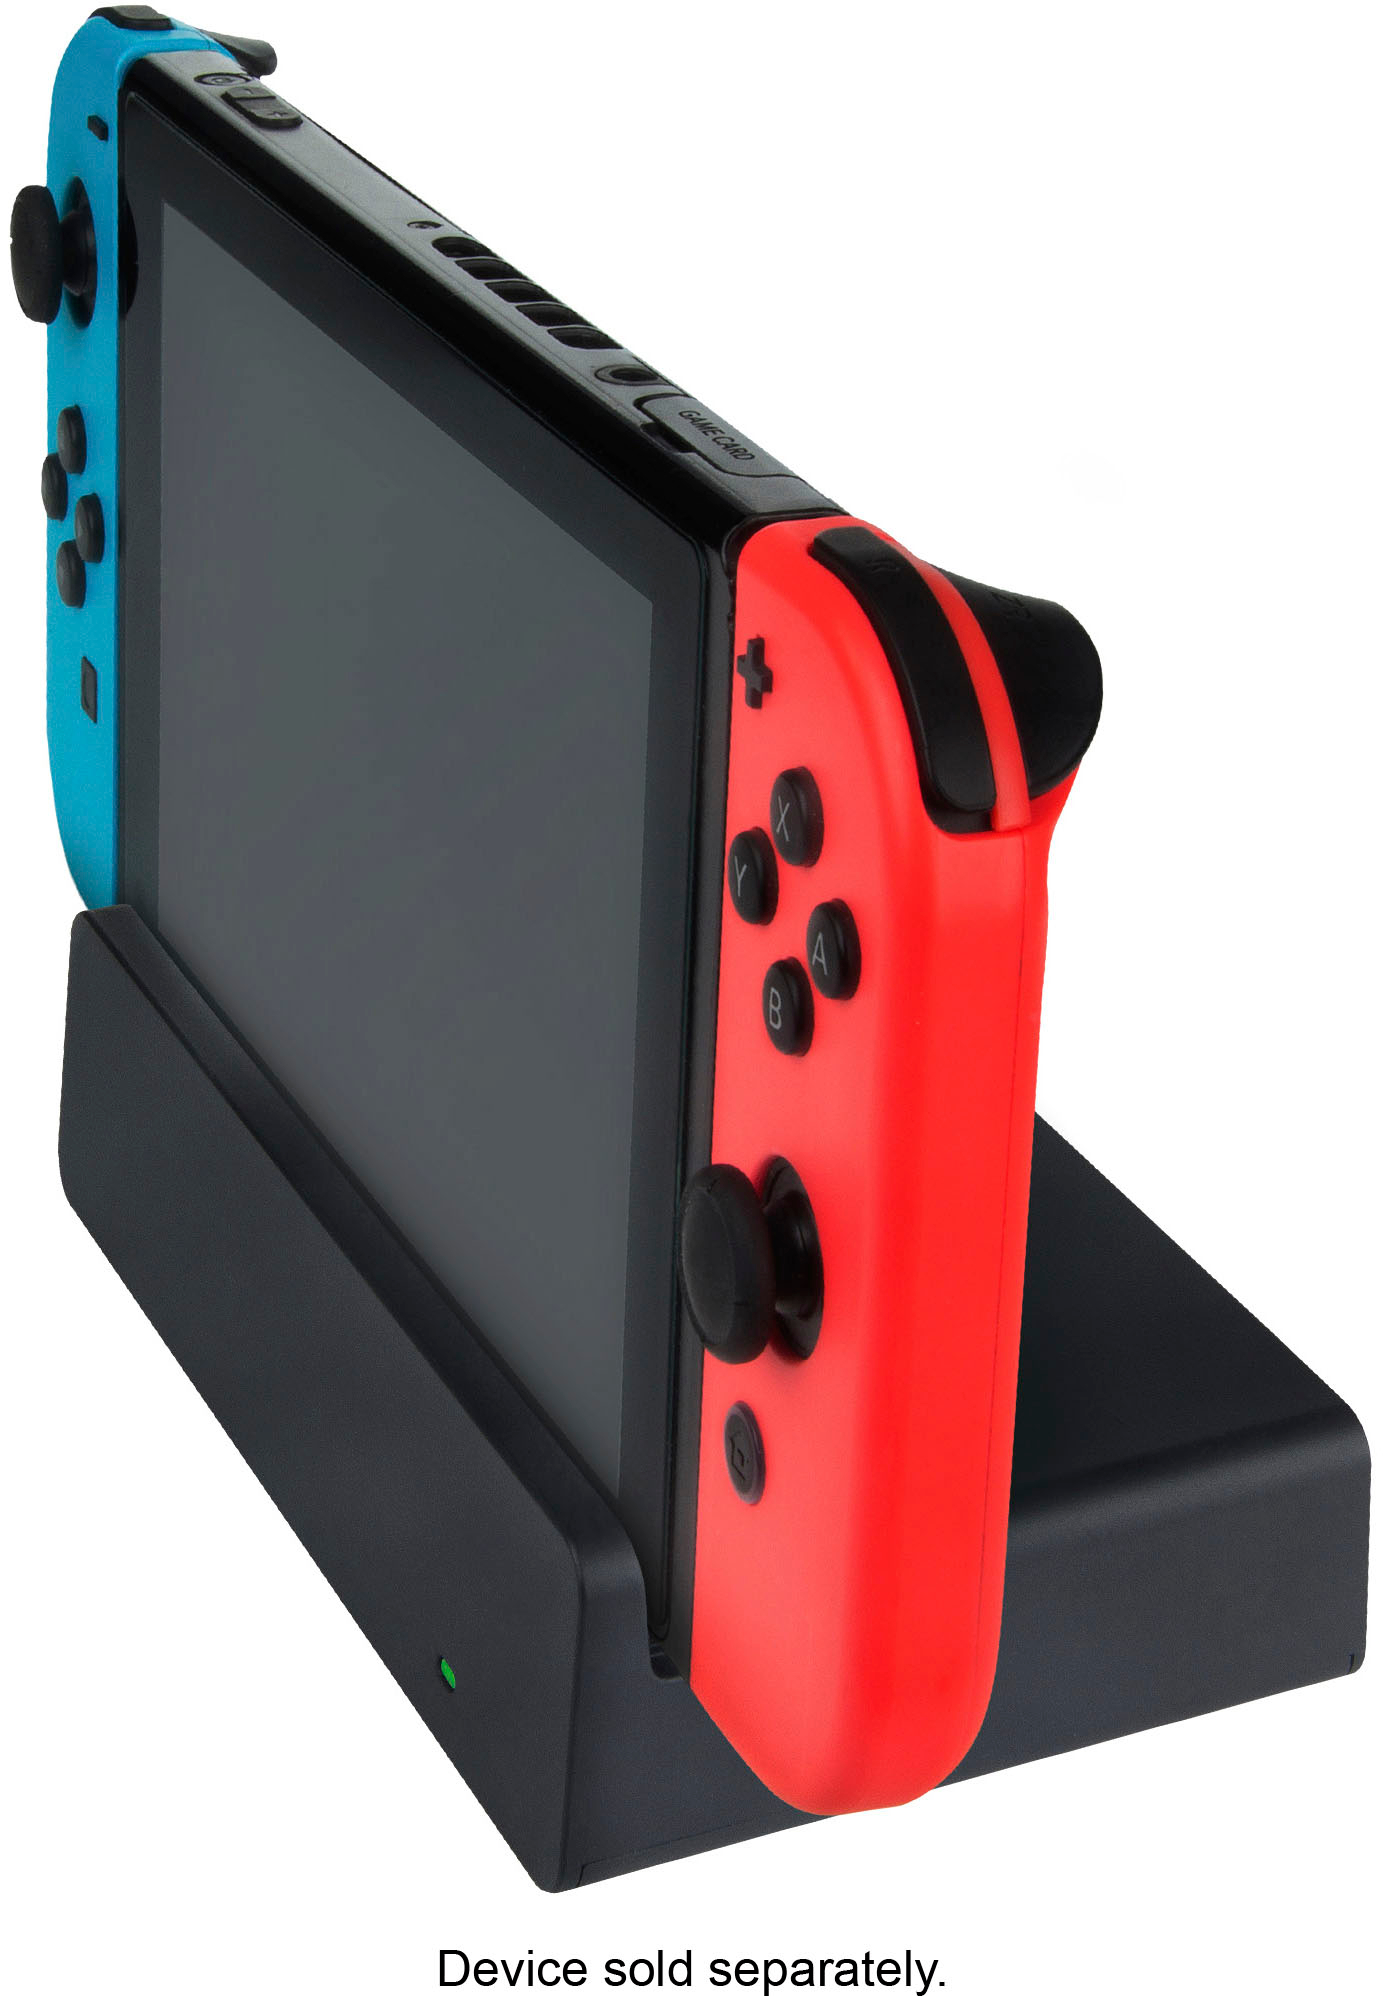 The Nintendo Switch OLED Dock Can Be Purchased Separately